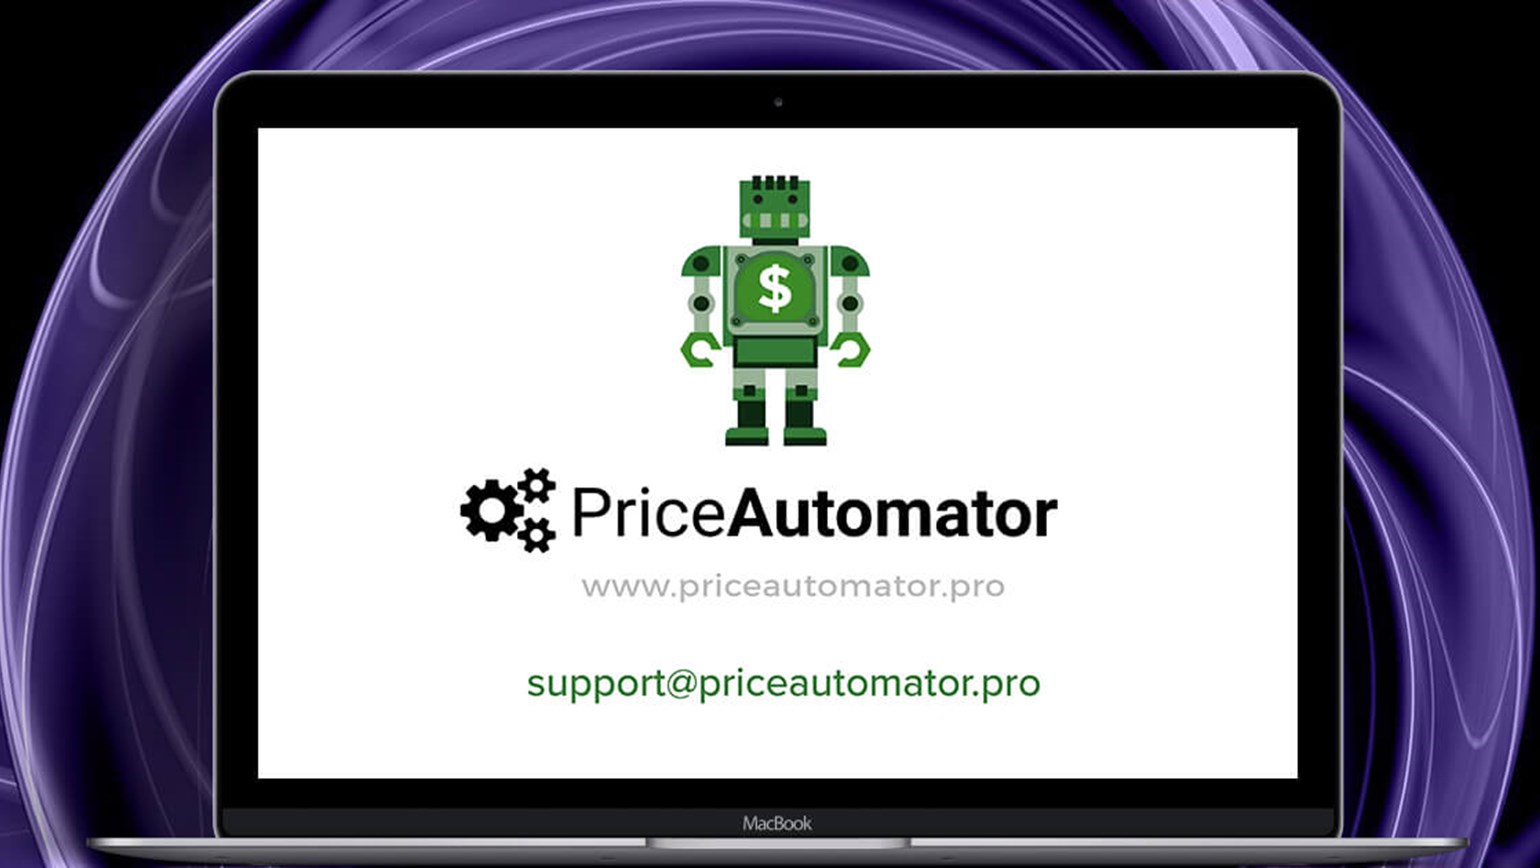 Promotional Pricing for PriceAutomator Extended